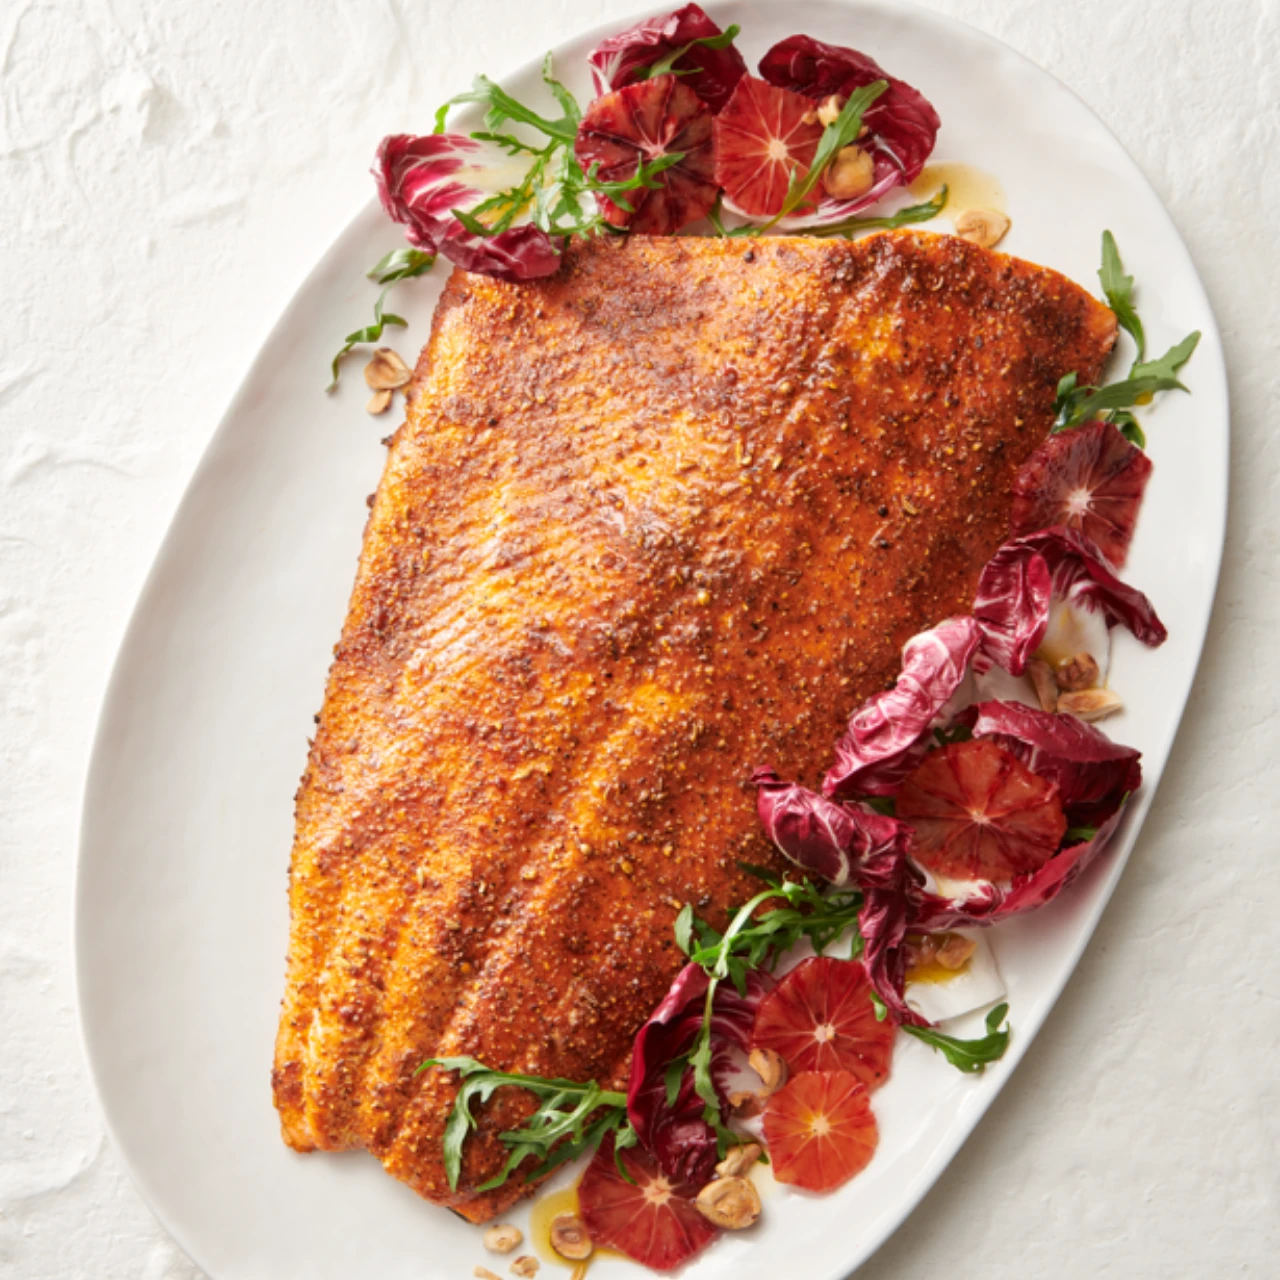 Make our delicious Spice-rubbed NZ king salmon with raddicchio, blood oranges and roasted hazelnuts recipe.